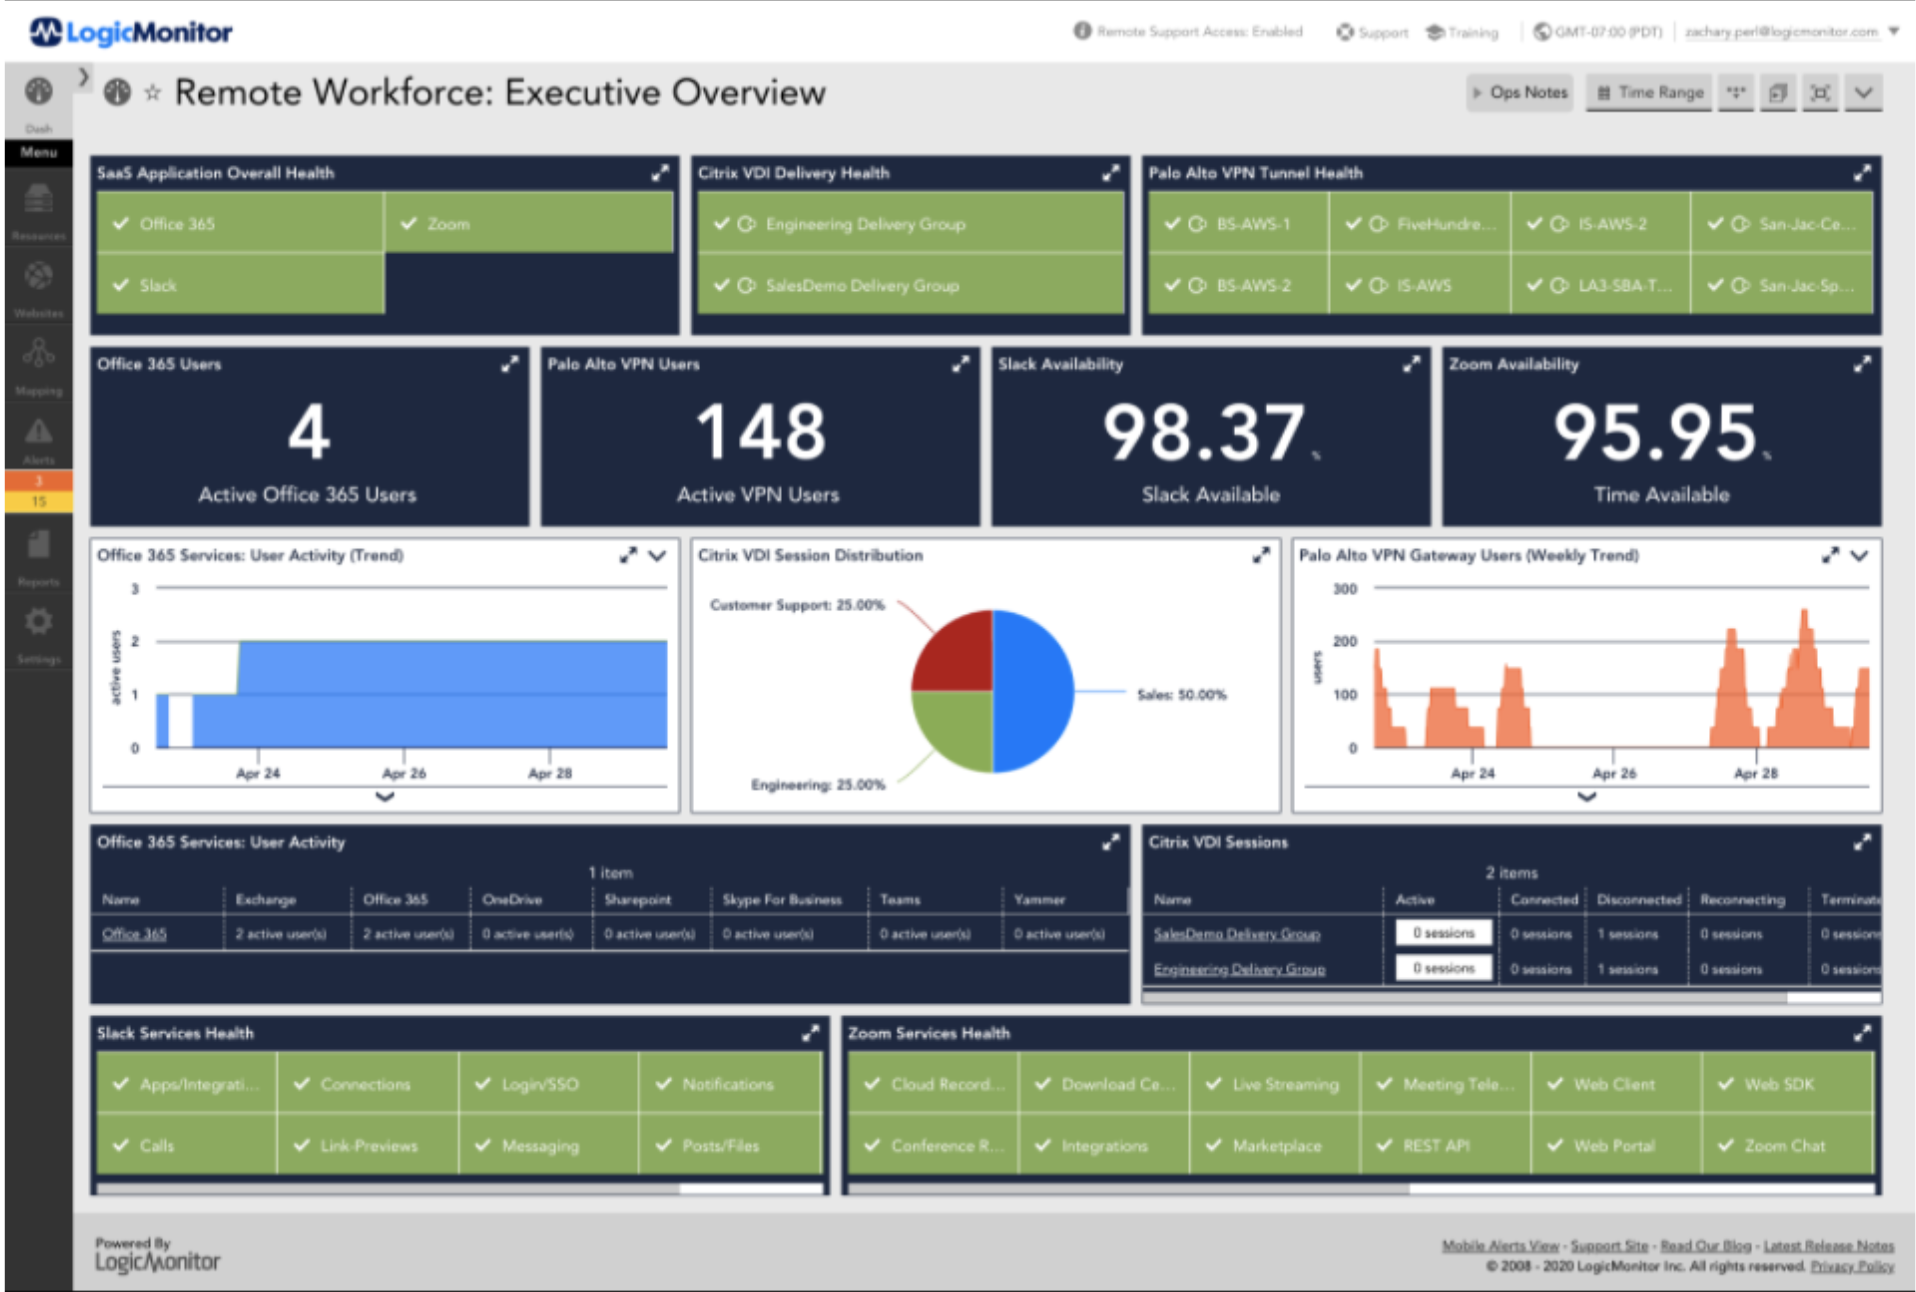 Remote Workforce: Executive Overview Dashboard